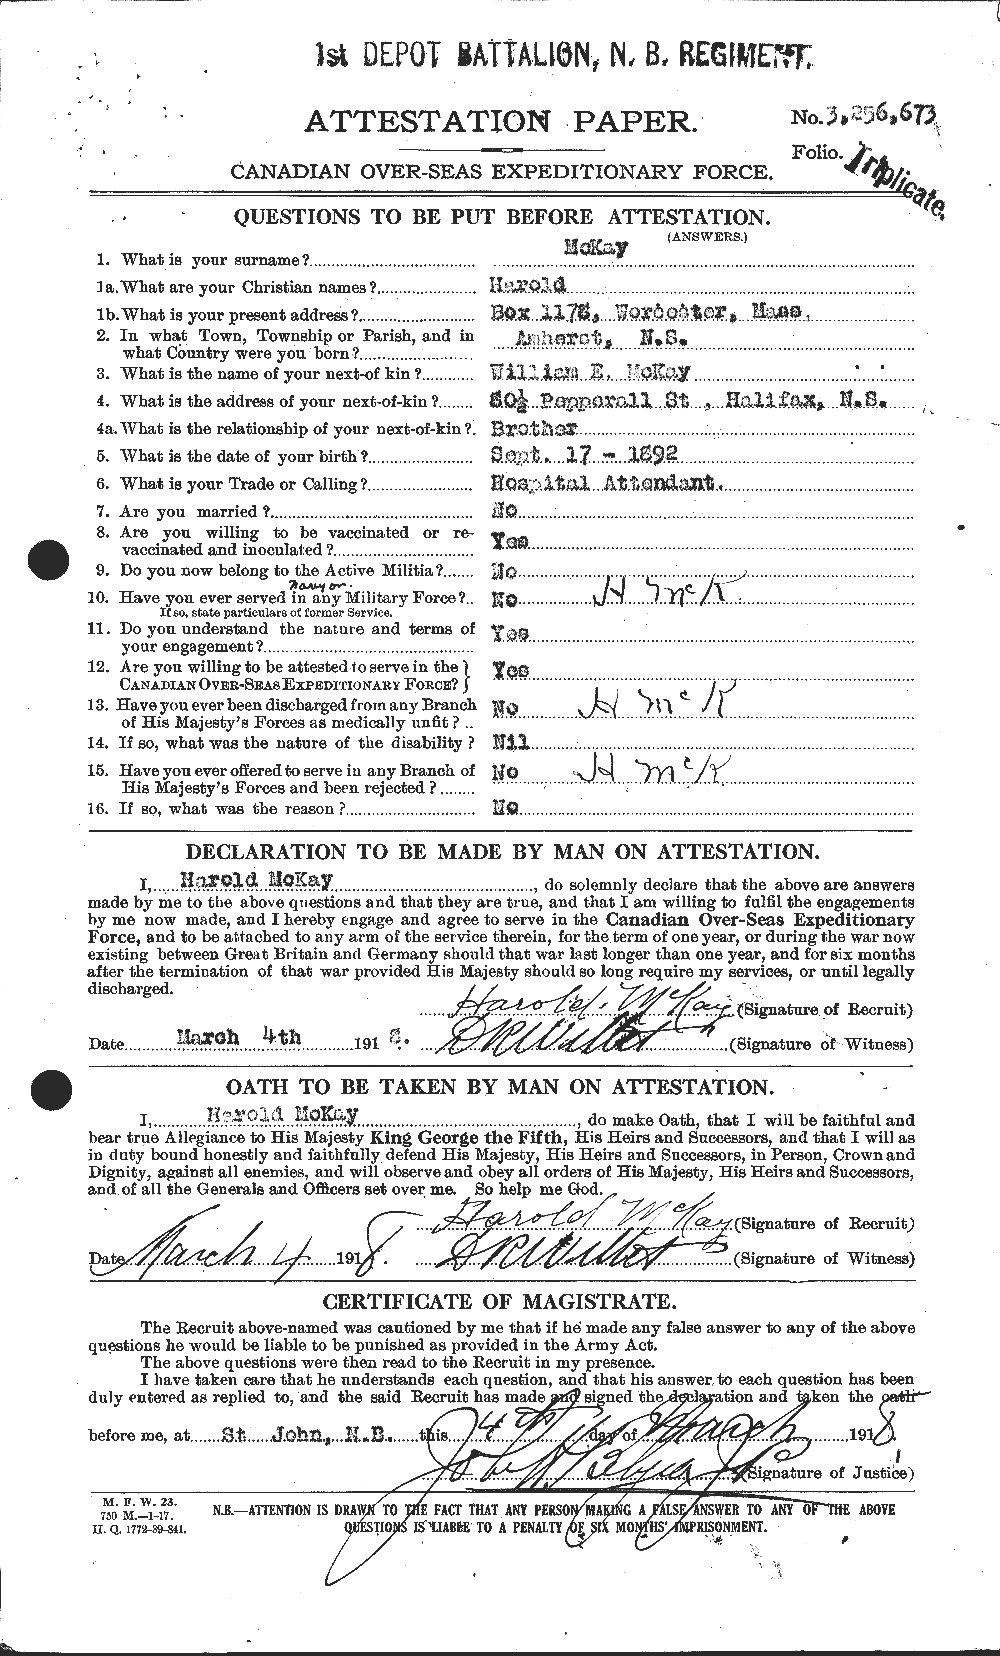 Personnel Records of the First World War - CEF 534713a